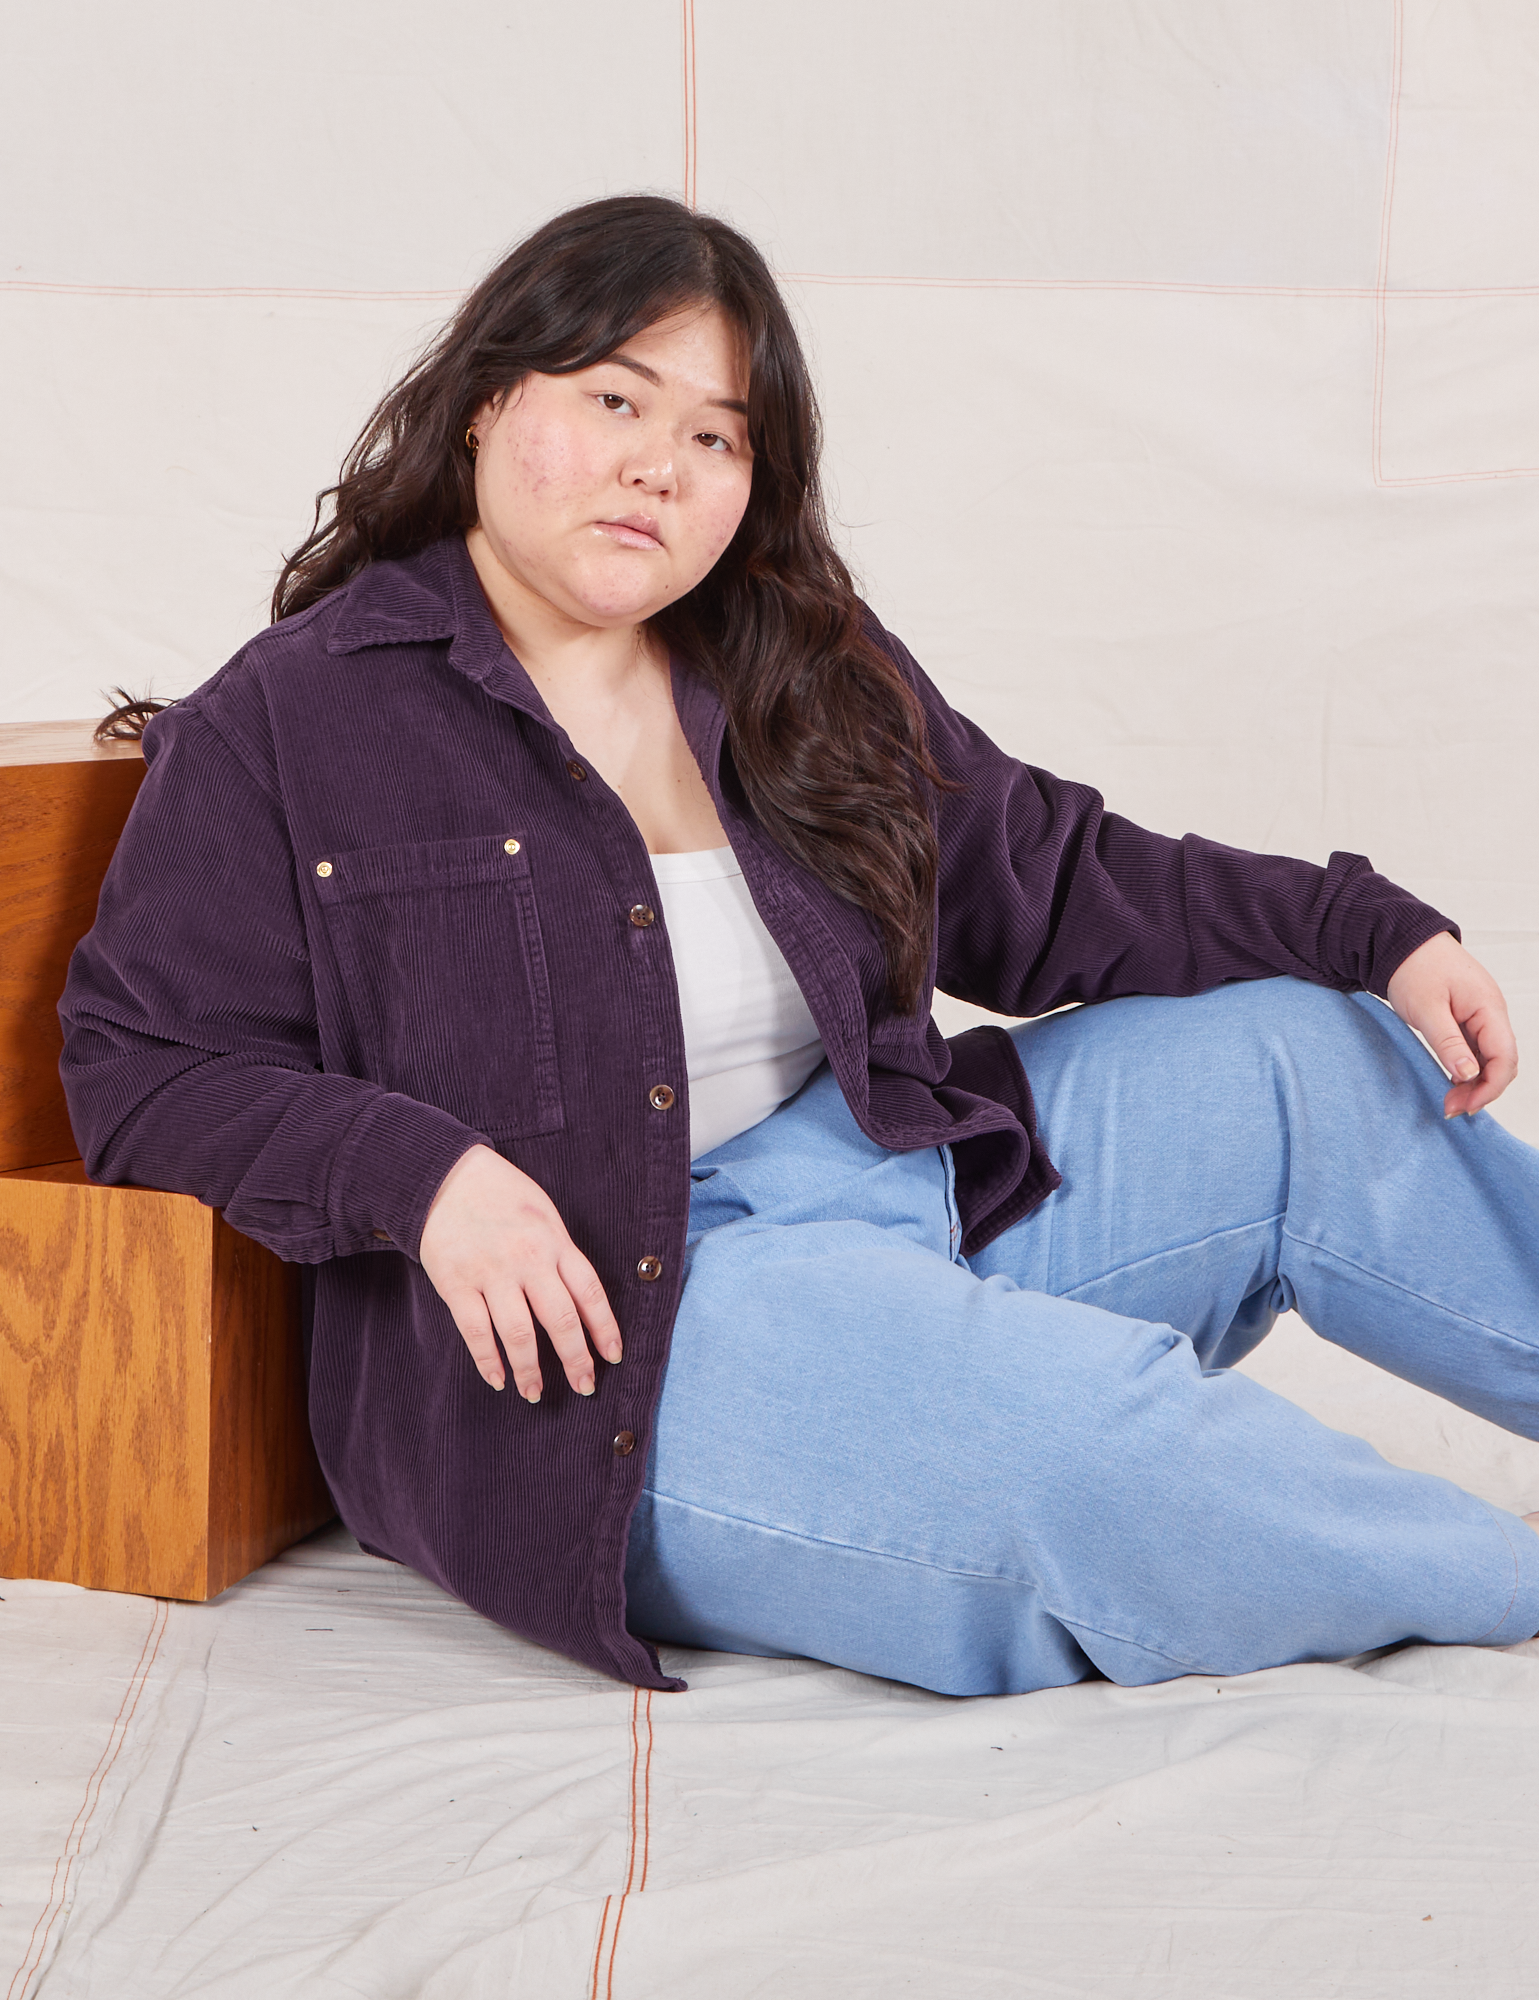 Ashley is wearing Corduroy Overshirt in Nebula Purple and a vintage off-white Cropped Cami underneath and light wash Denim Trouser Jeans